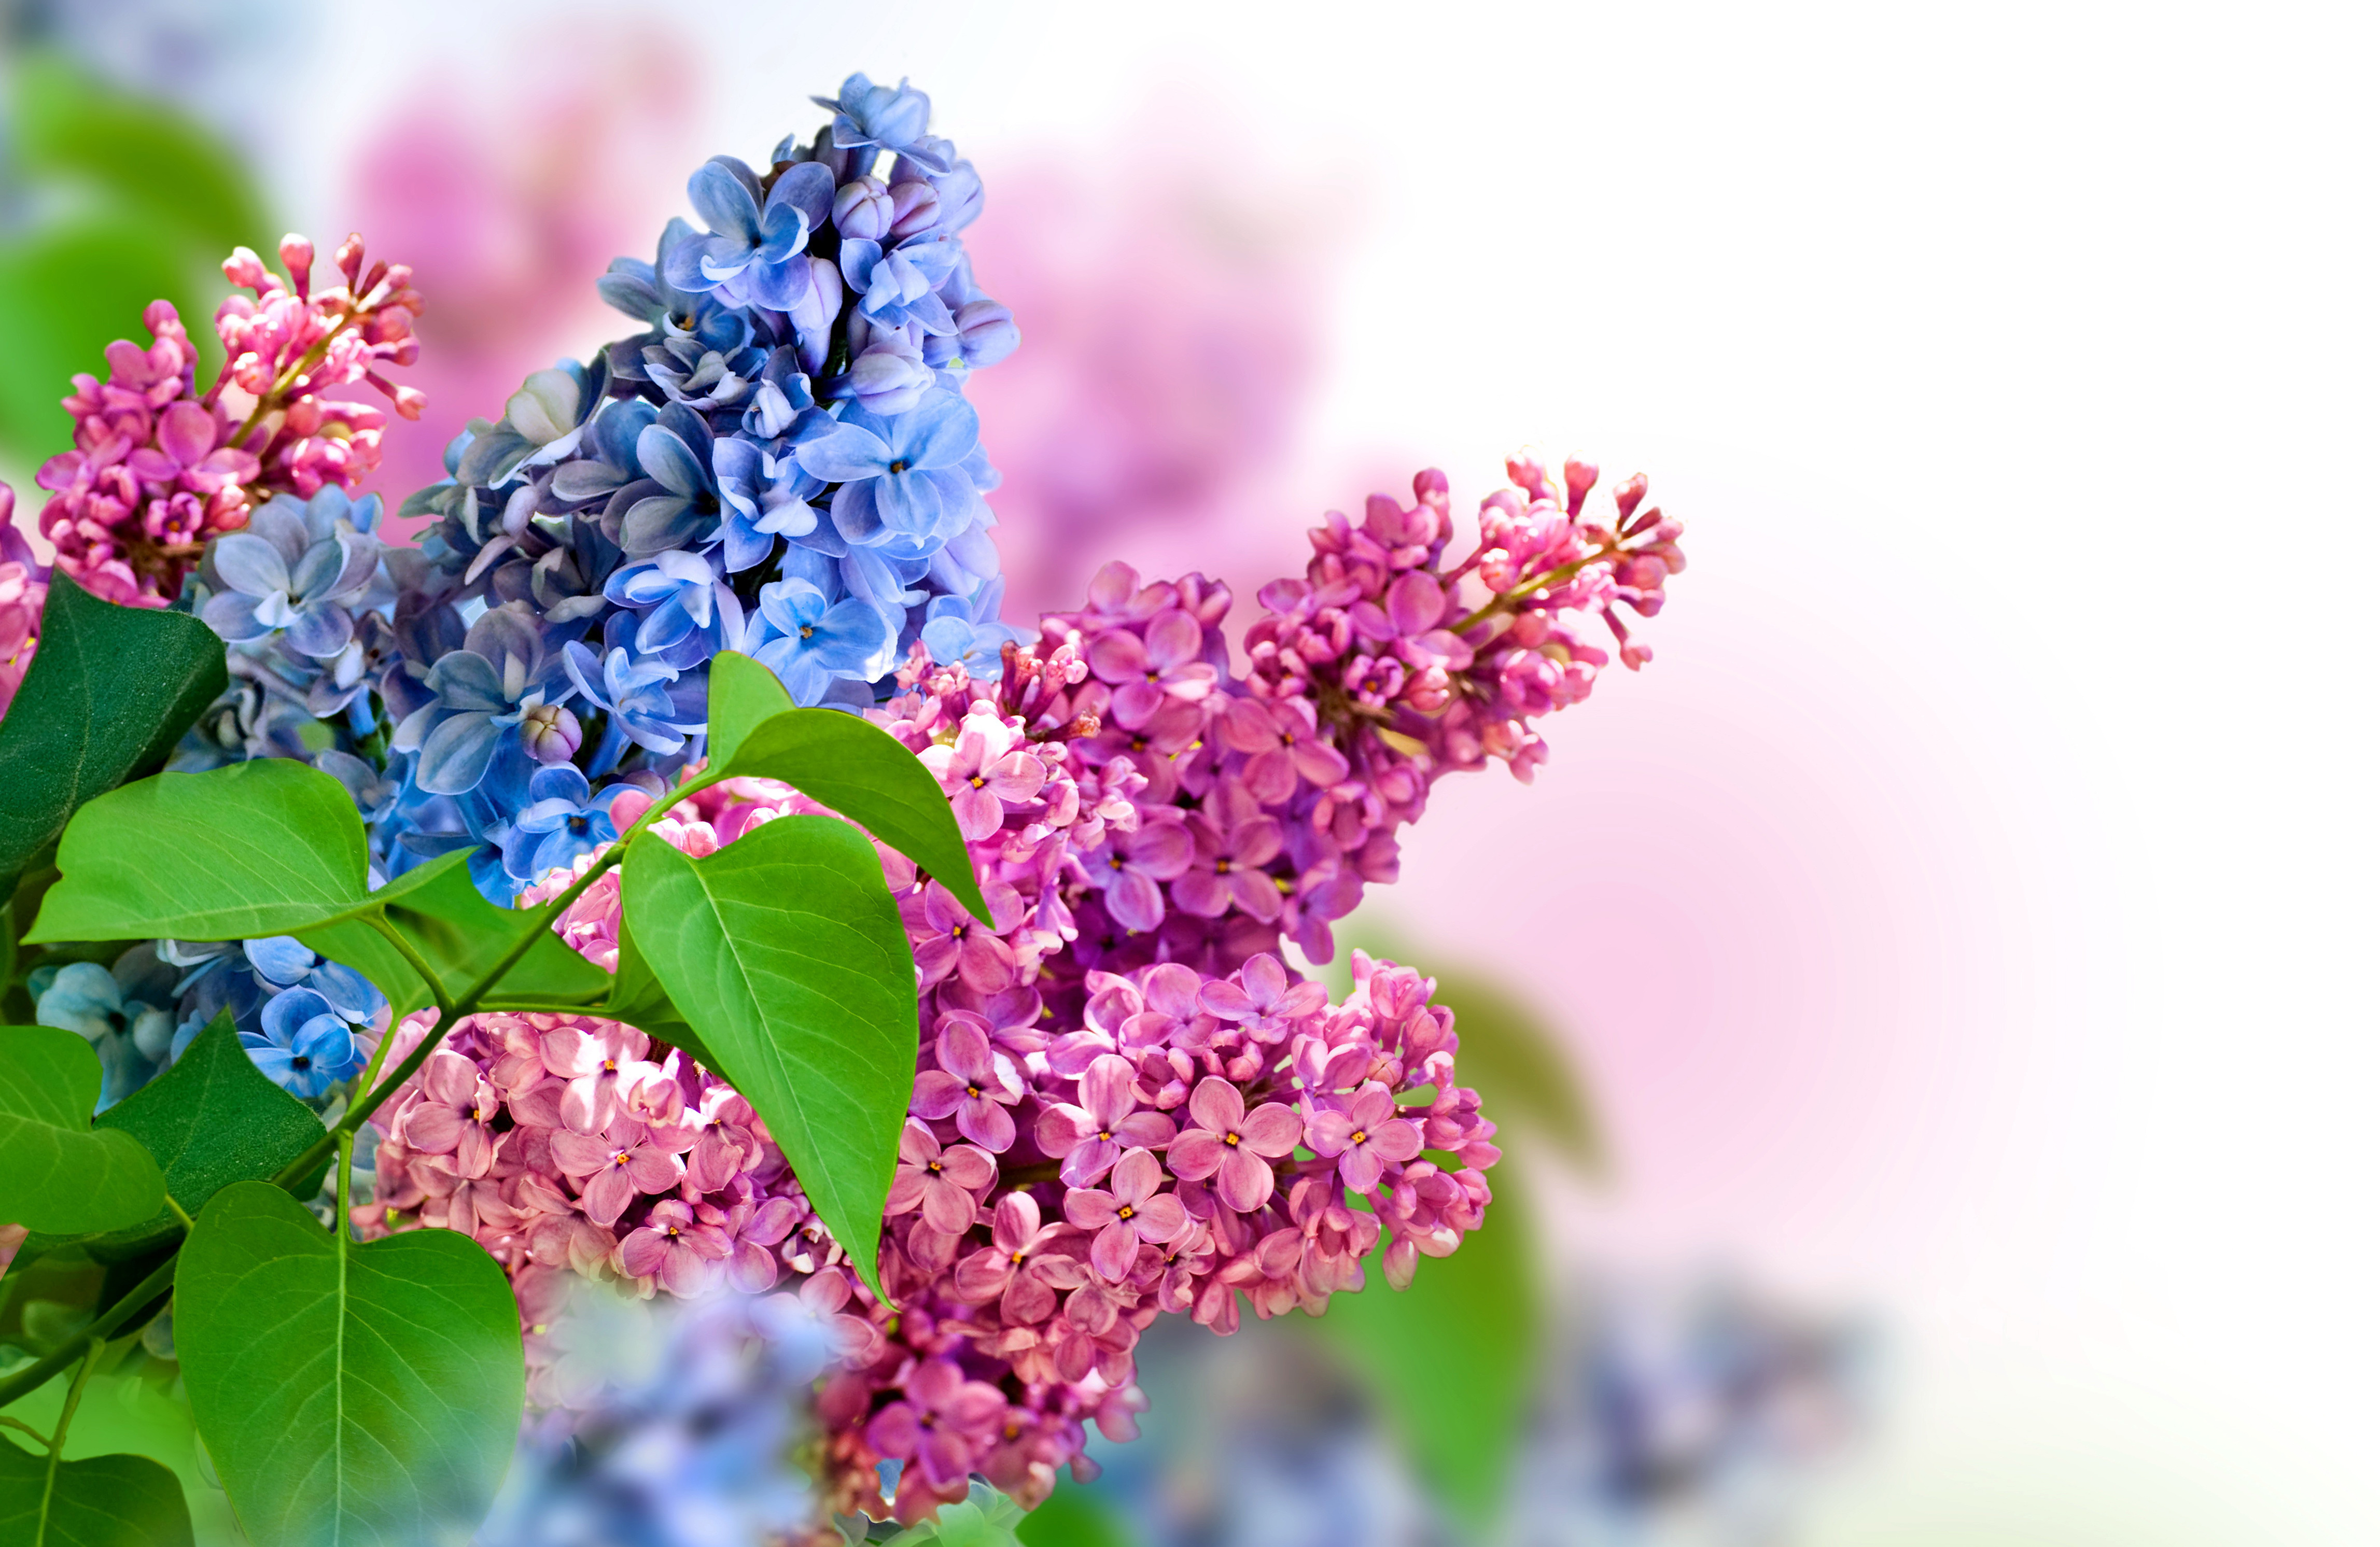 Image: Lilac, flowers, bright